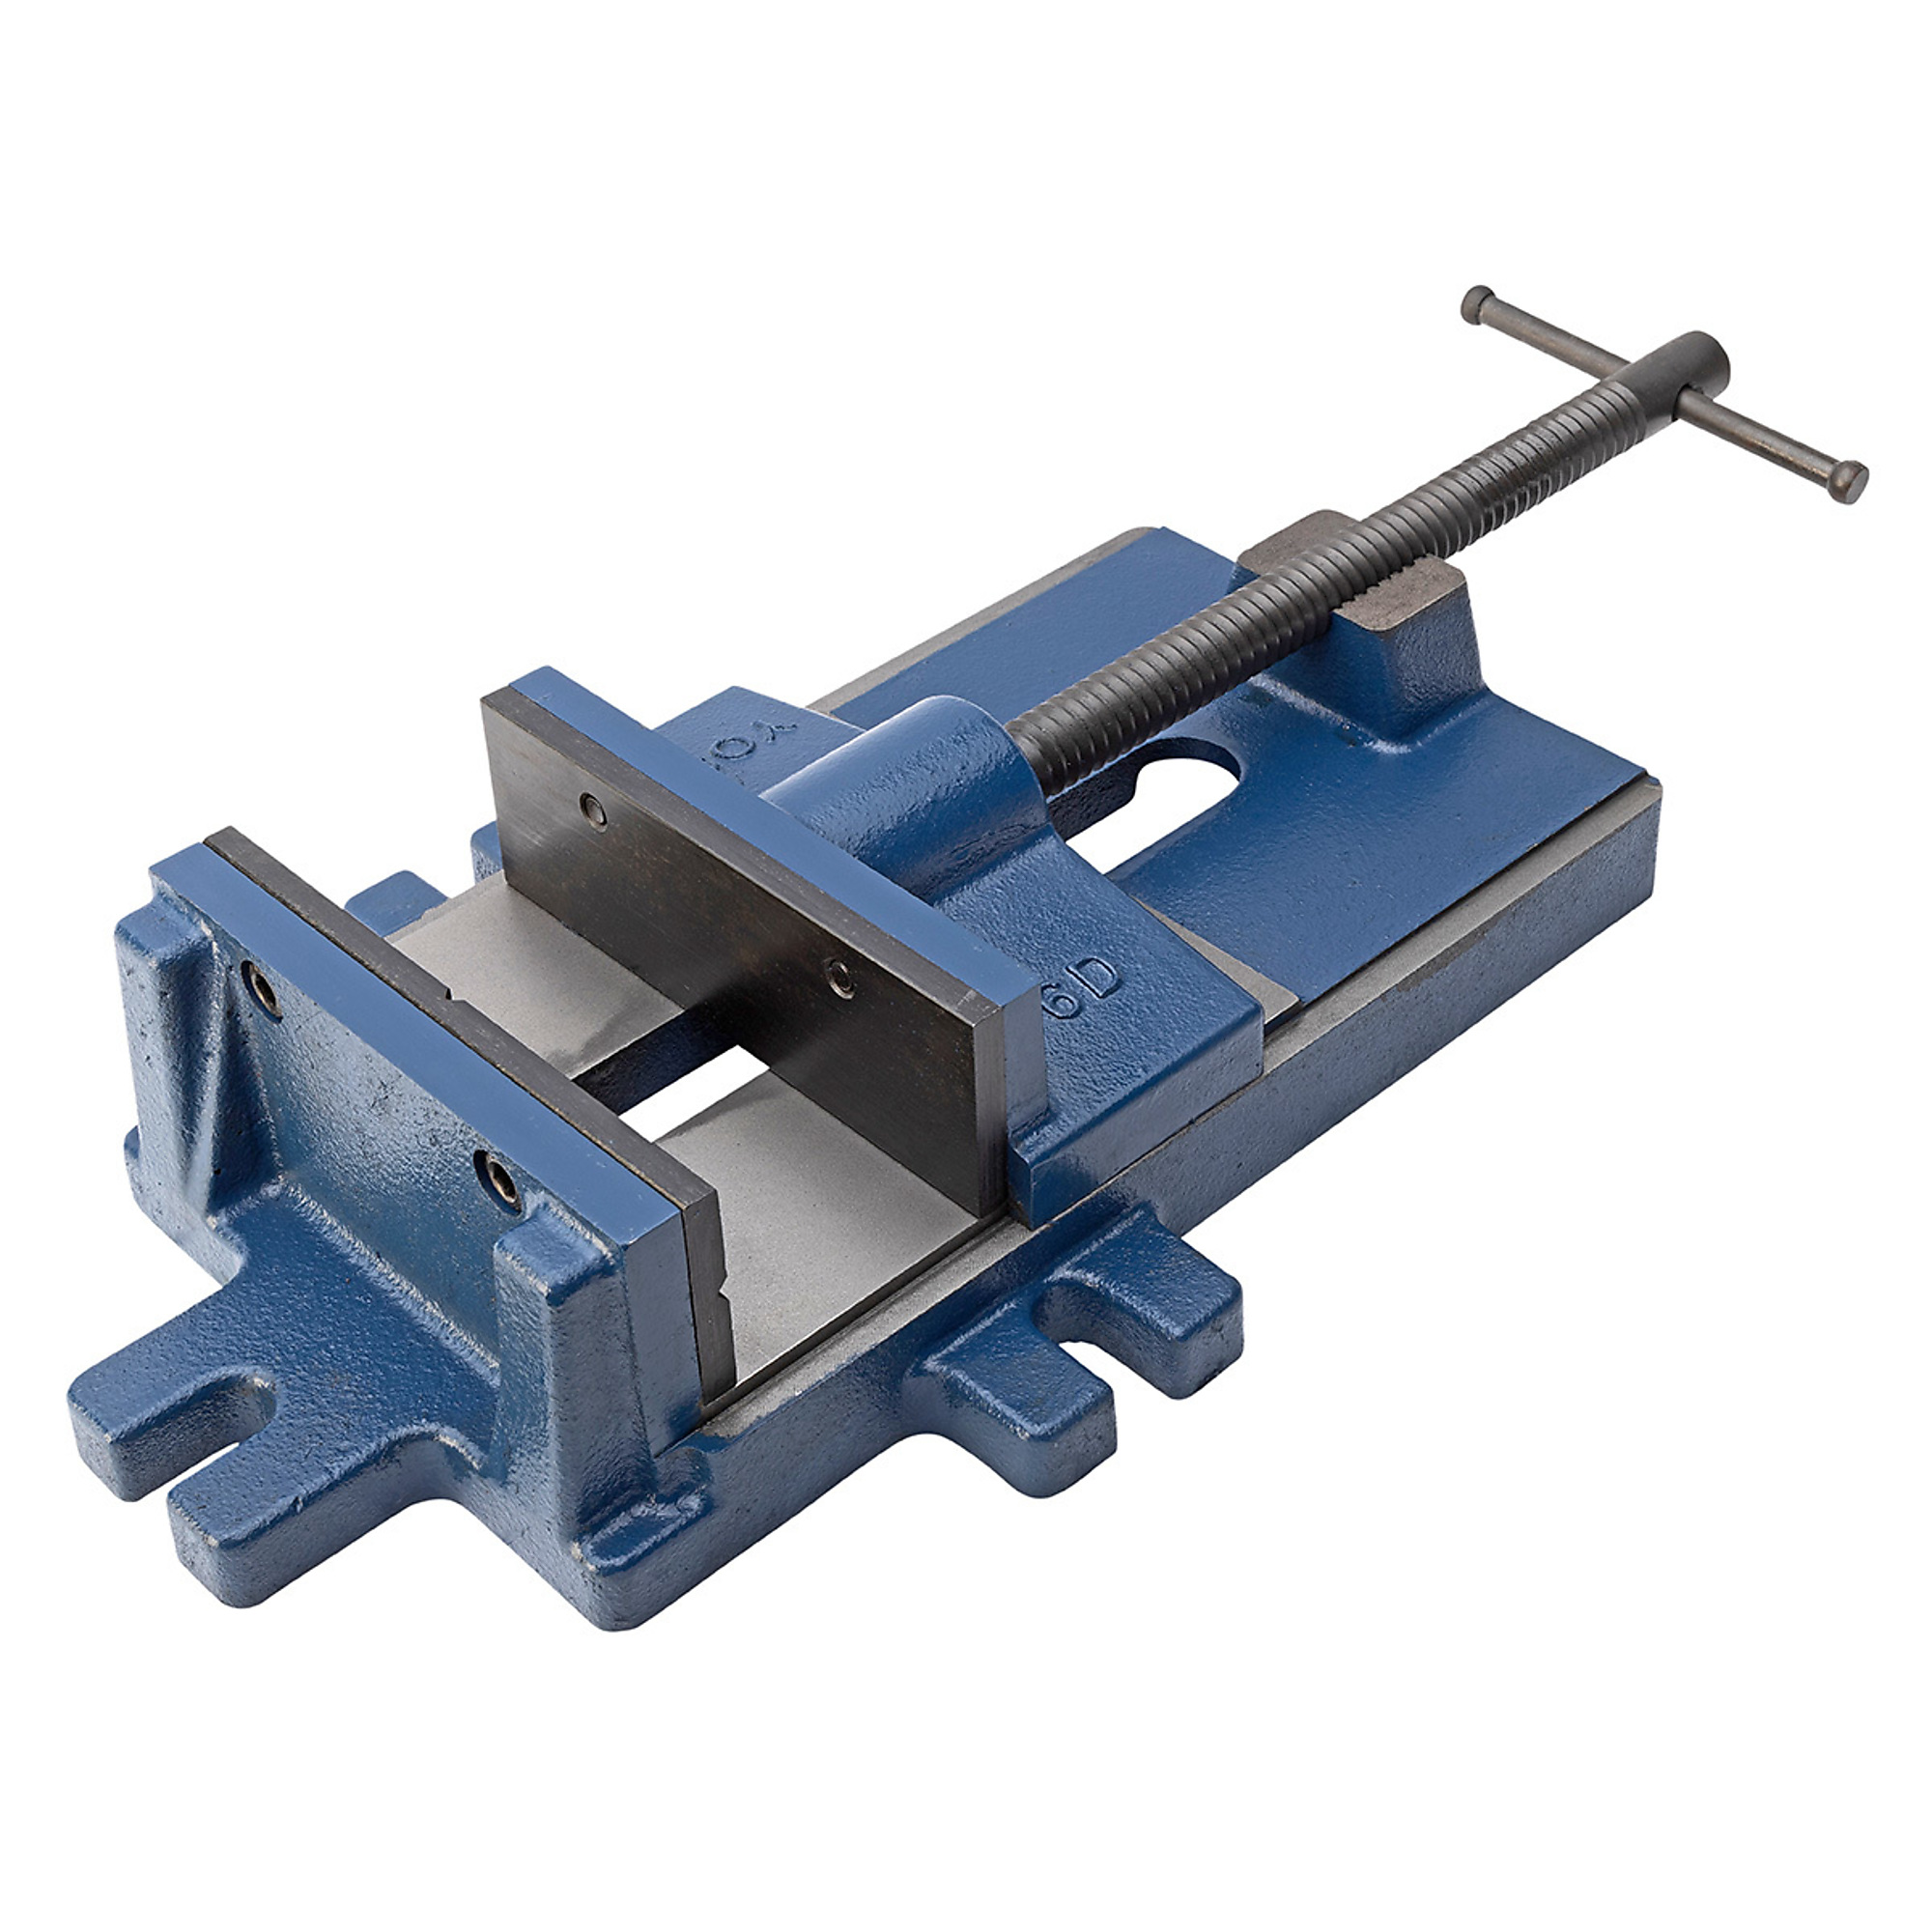 Yost Vises, 6Inch HD Drill Press Vise, Jaw Width 6 in, Jaw Capacity 6 in, Material Cast Iron, Model 6D-QR